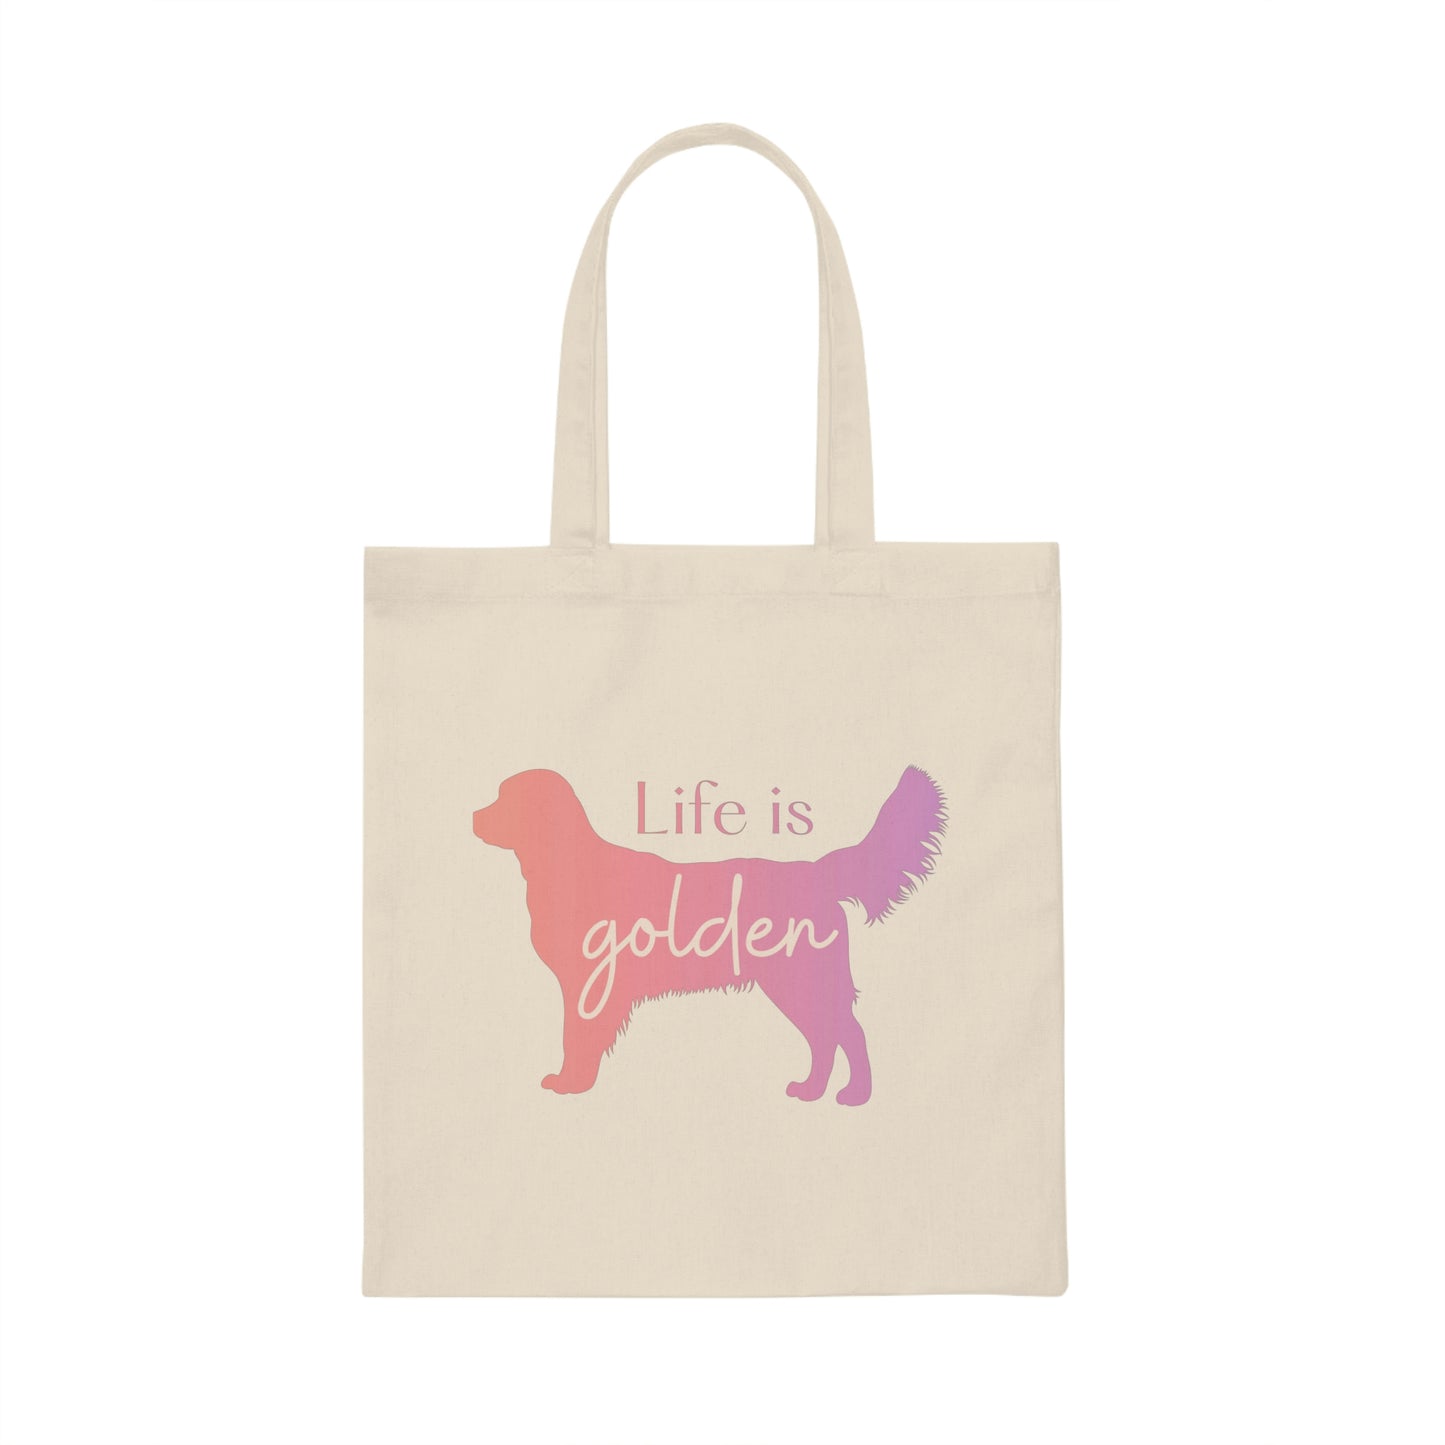 Life is Golden Canvas Tote Bag - Reusable Grocery Bag for Book Lover - (Pink/Purple Ombre)